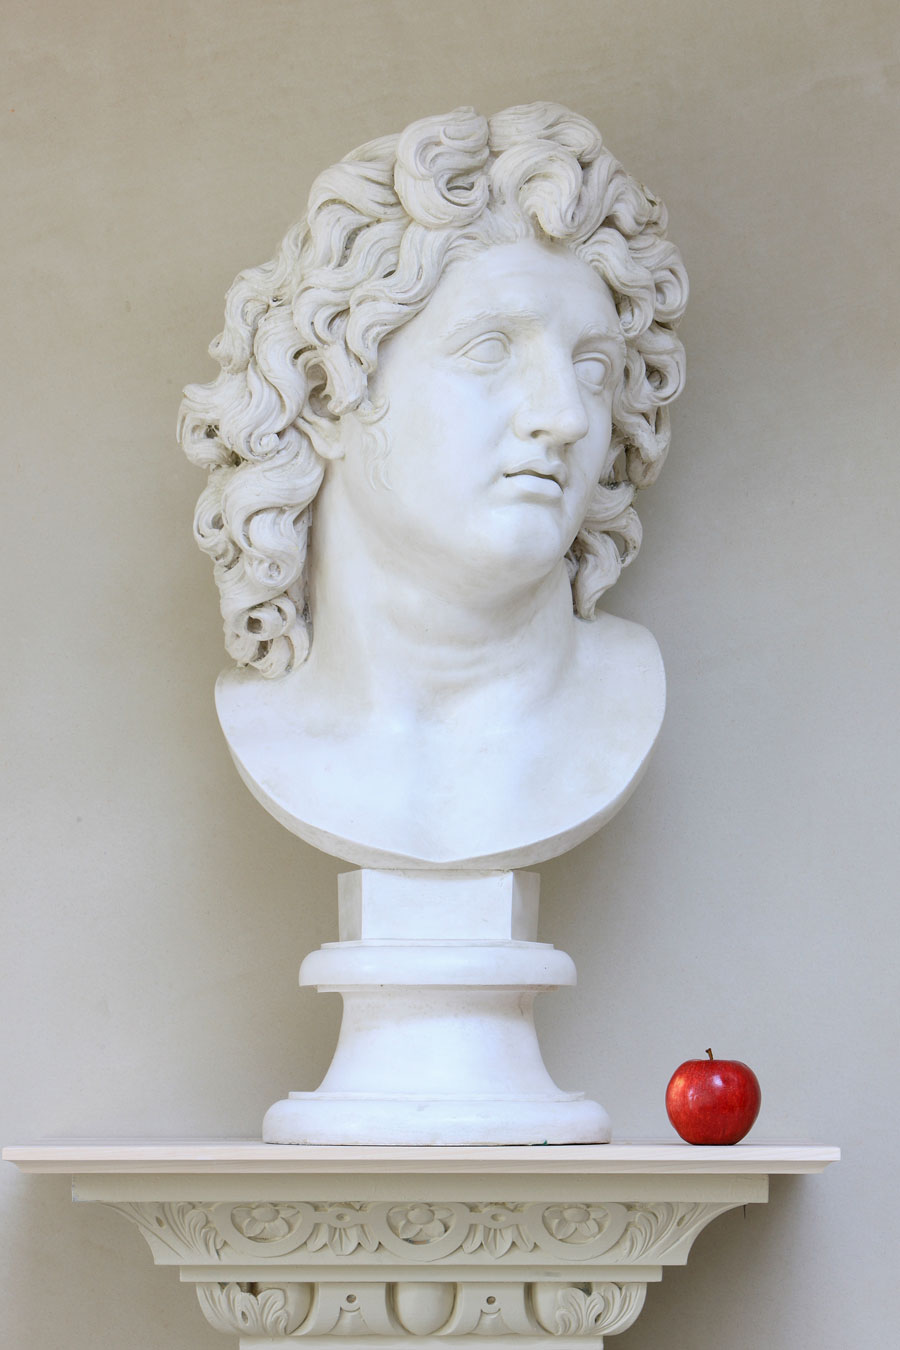 Copy of a Marble from a Portrait of Alexander the Great